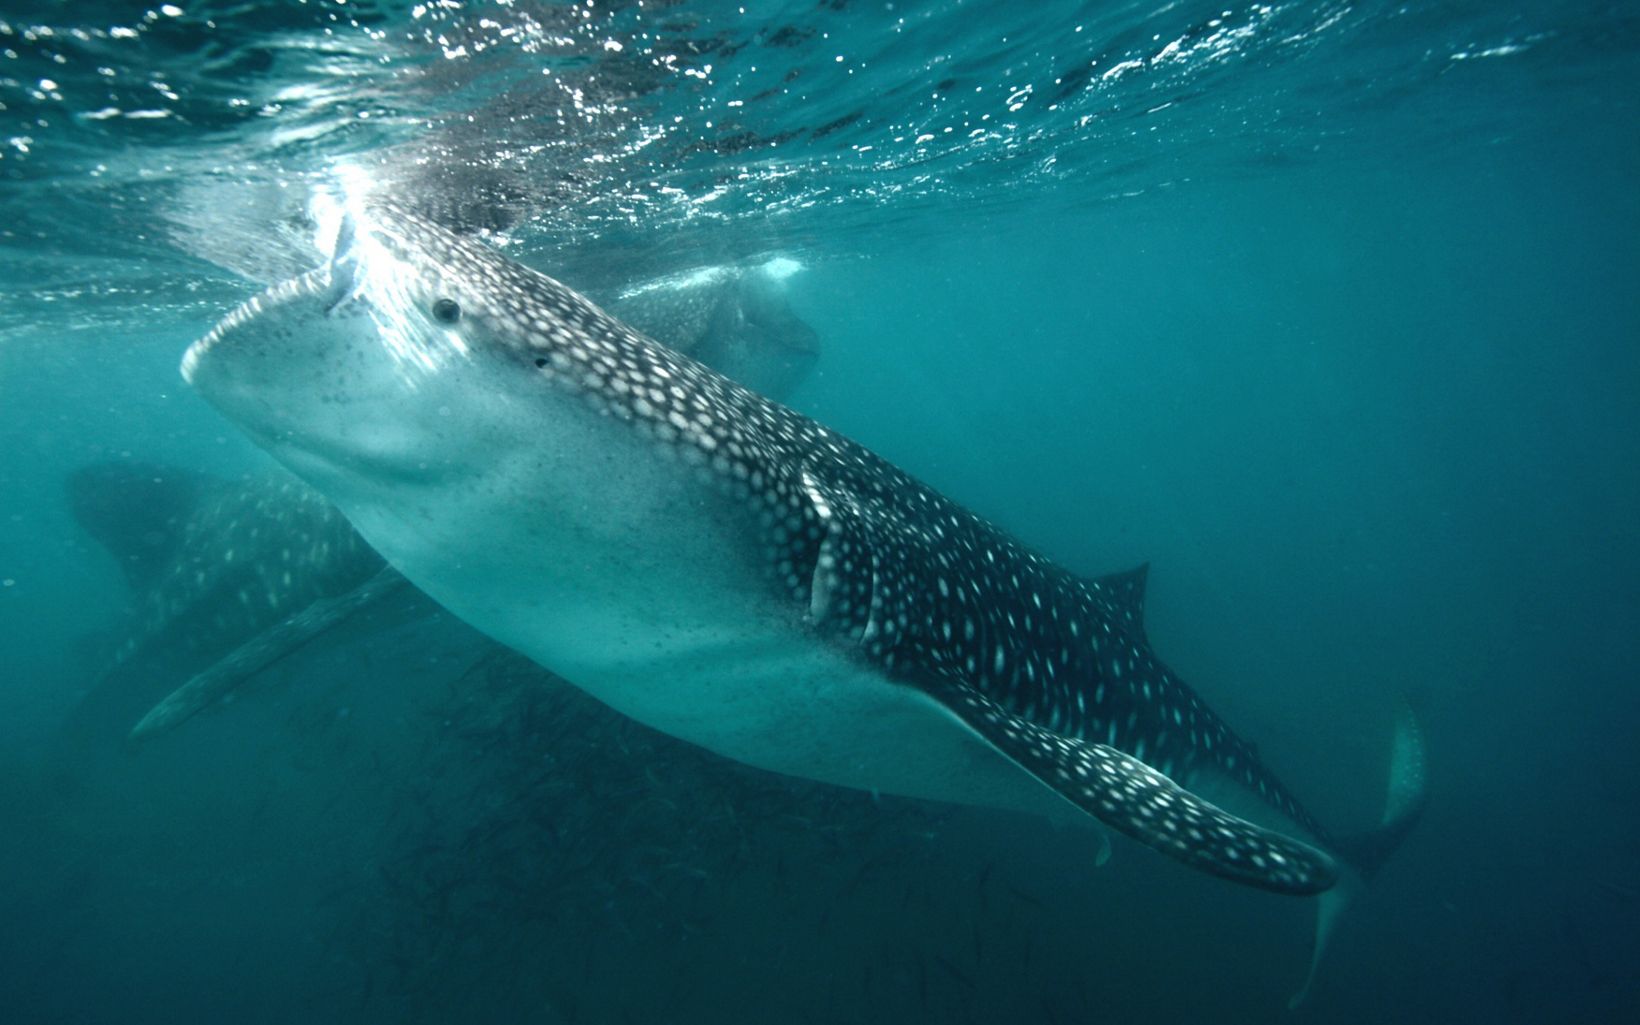 Whale Sharks A pair of juvenile whale sharks measuring nearly 20 feet in length feed in the productive waters off La Paz in Mexico’s Baja California. © Carlos Aguilera Calderón